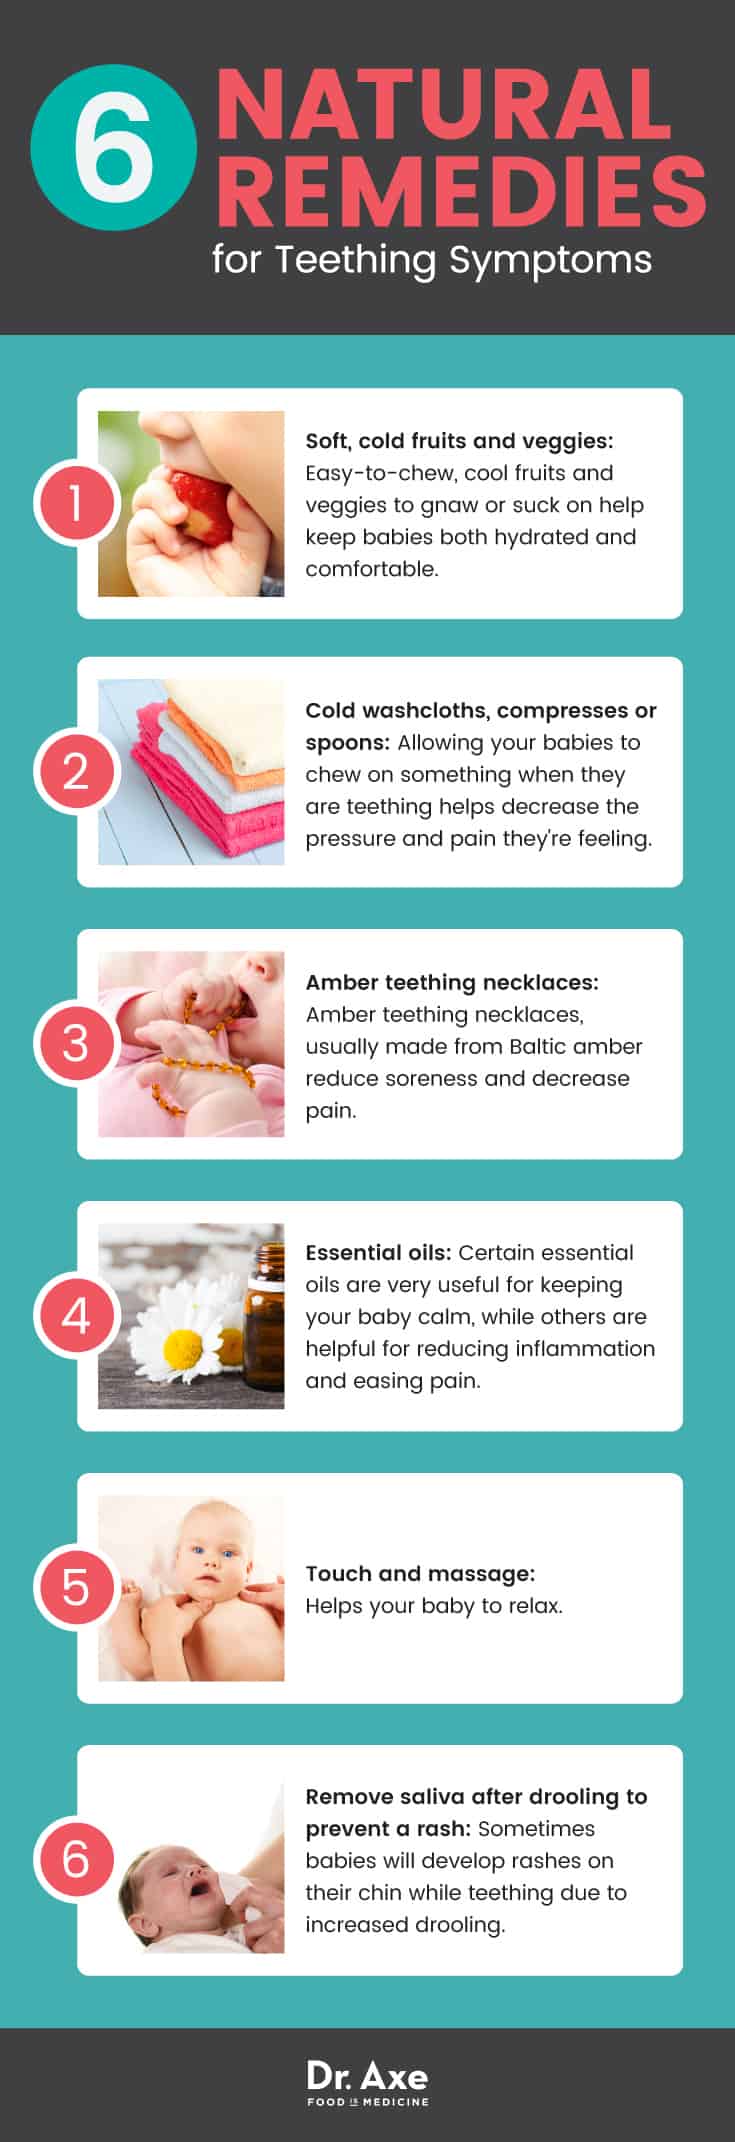 6 natural remedies for teething symptoms - Dr. Axe